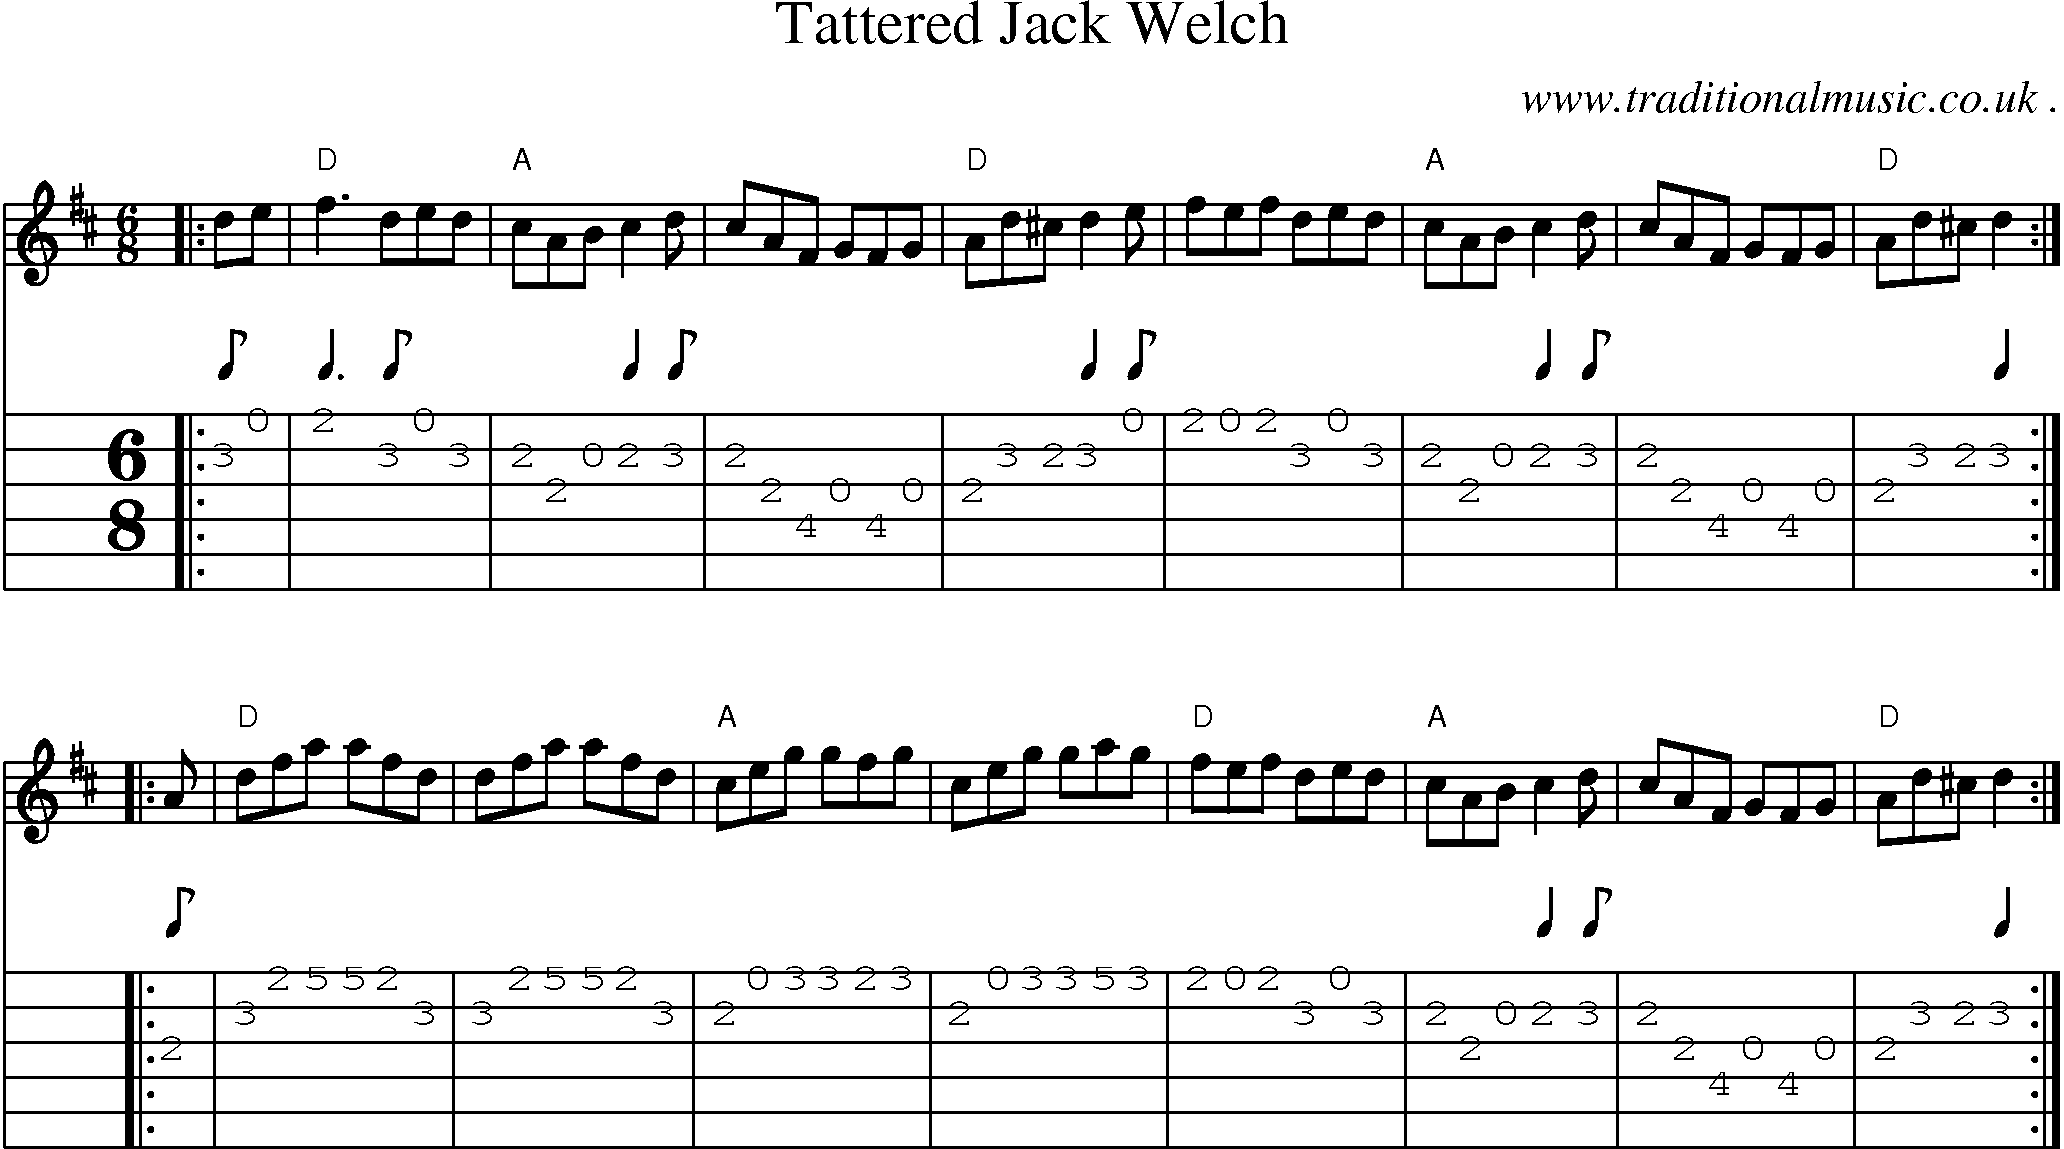 Music Score and Guitar Tabs for Tattered Jack Welch